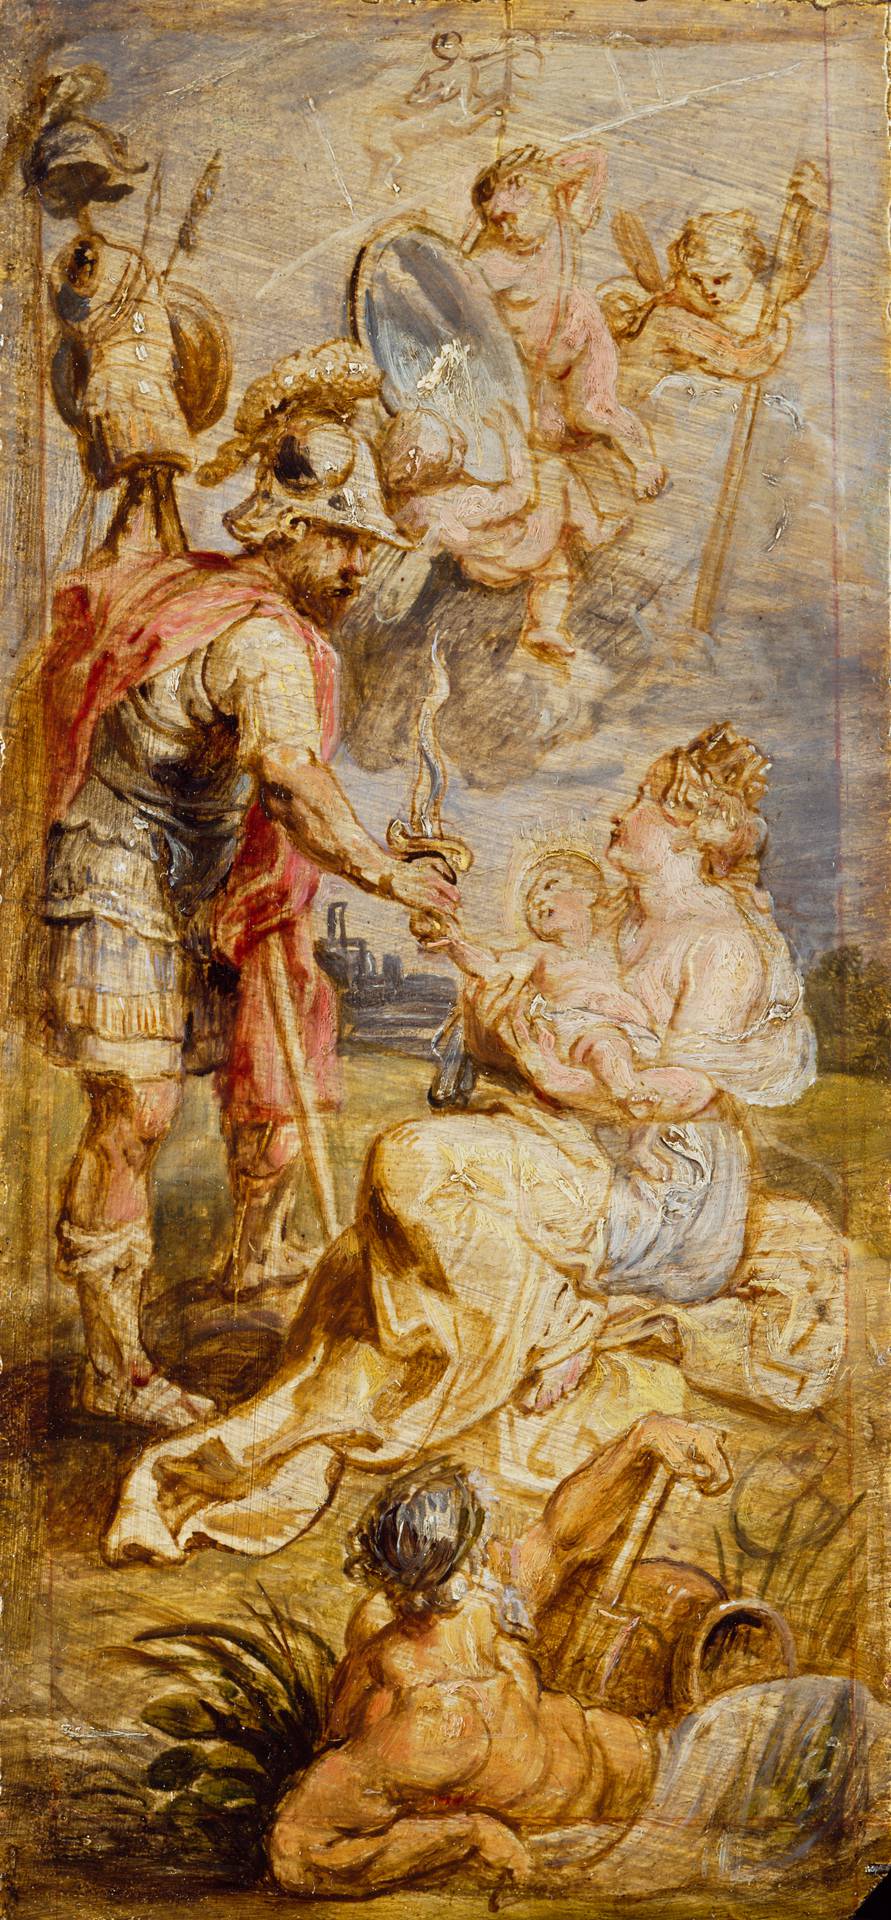 An oil sketch showing the birth of Henri IV